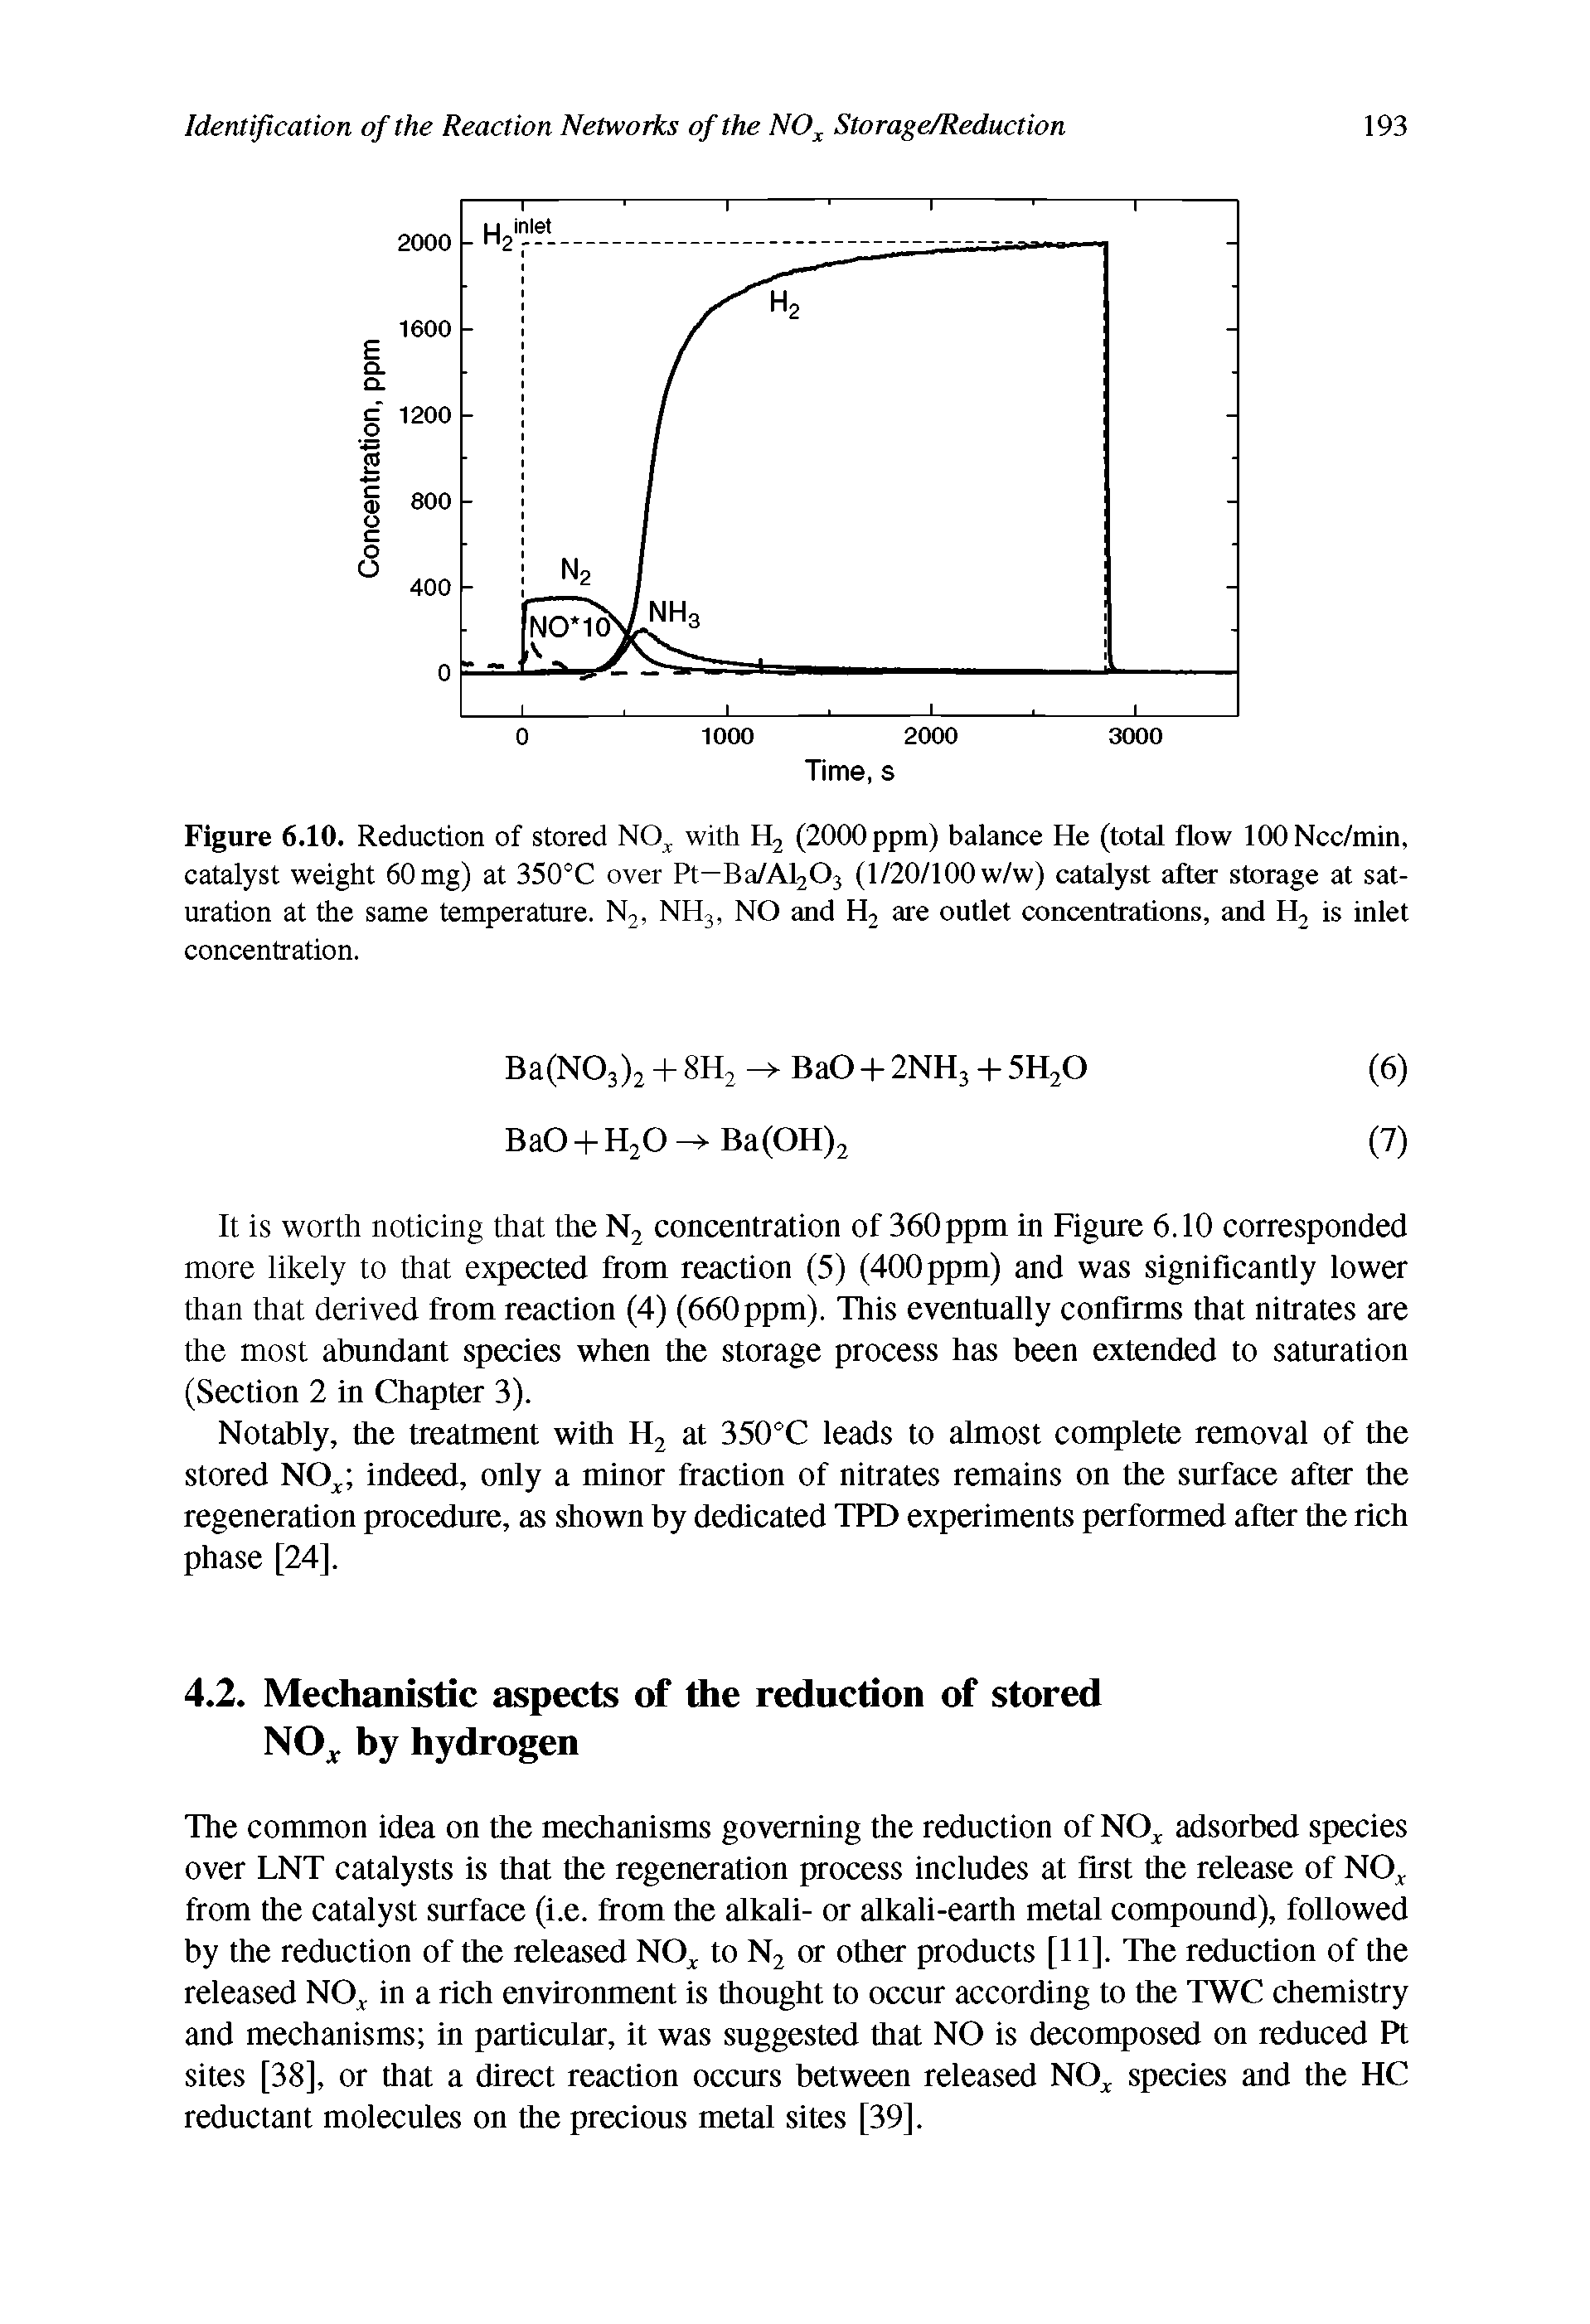 Figure 6.10. Reduction of stored N( ), with H2 (2000 ppm) balance He (total flow lOONcc/min, catalyst weight 60 mg) at 350°C over Pt—Ba/Al203 (1/20/100 w/w) catalyst after storage at saturation at the same temperature. N2, NH3, NO and H2 are outlet concentrations, and H2 is inlet concentration.